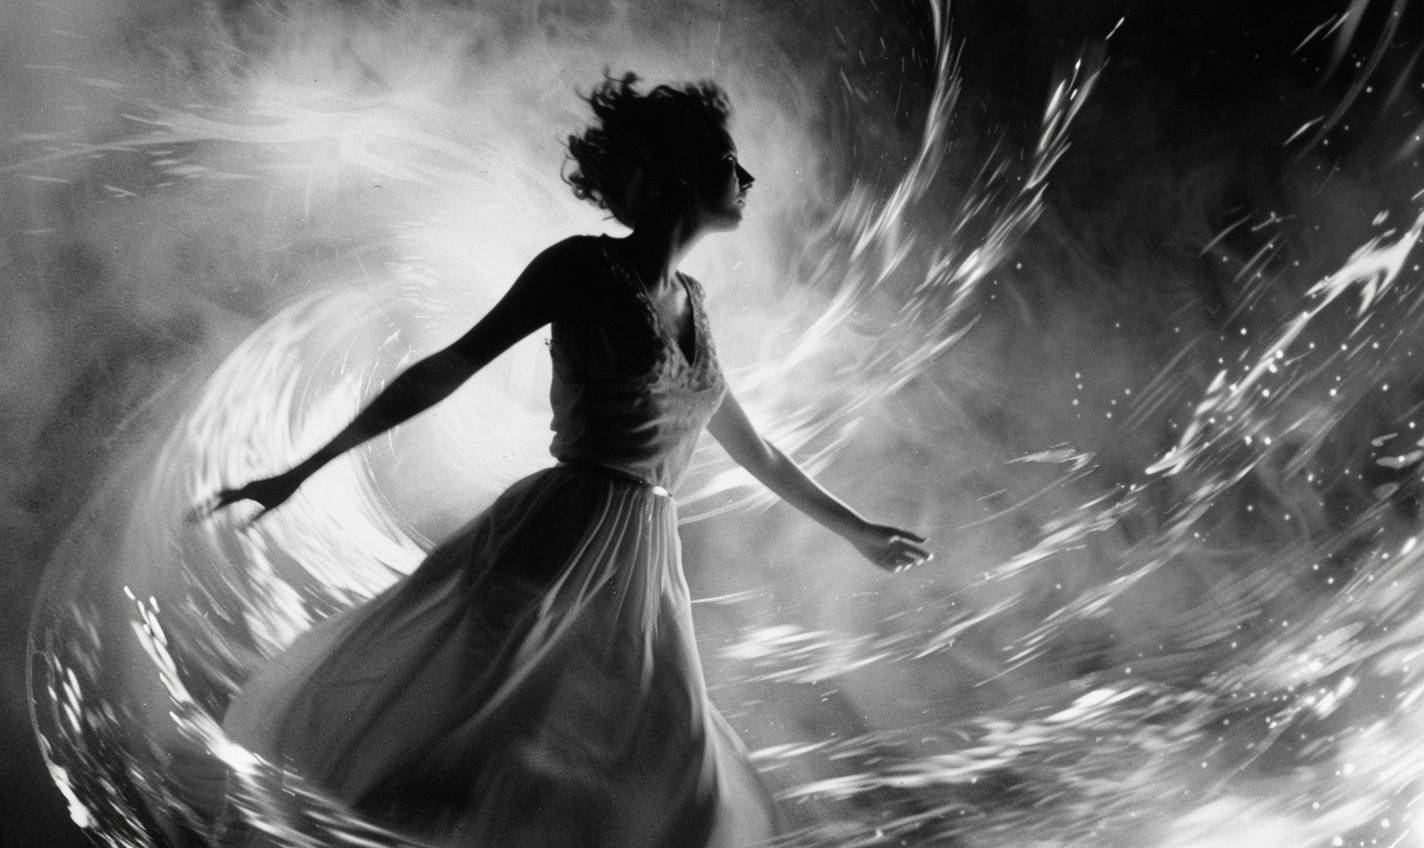 In the style of Lillian Bassman, cosmic journey through wormholes